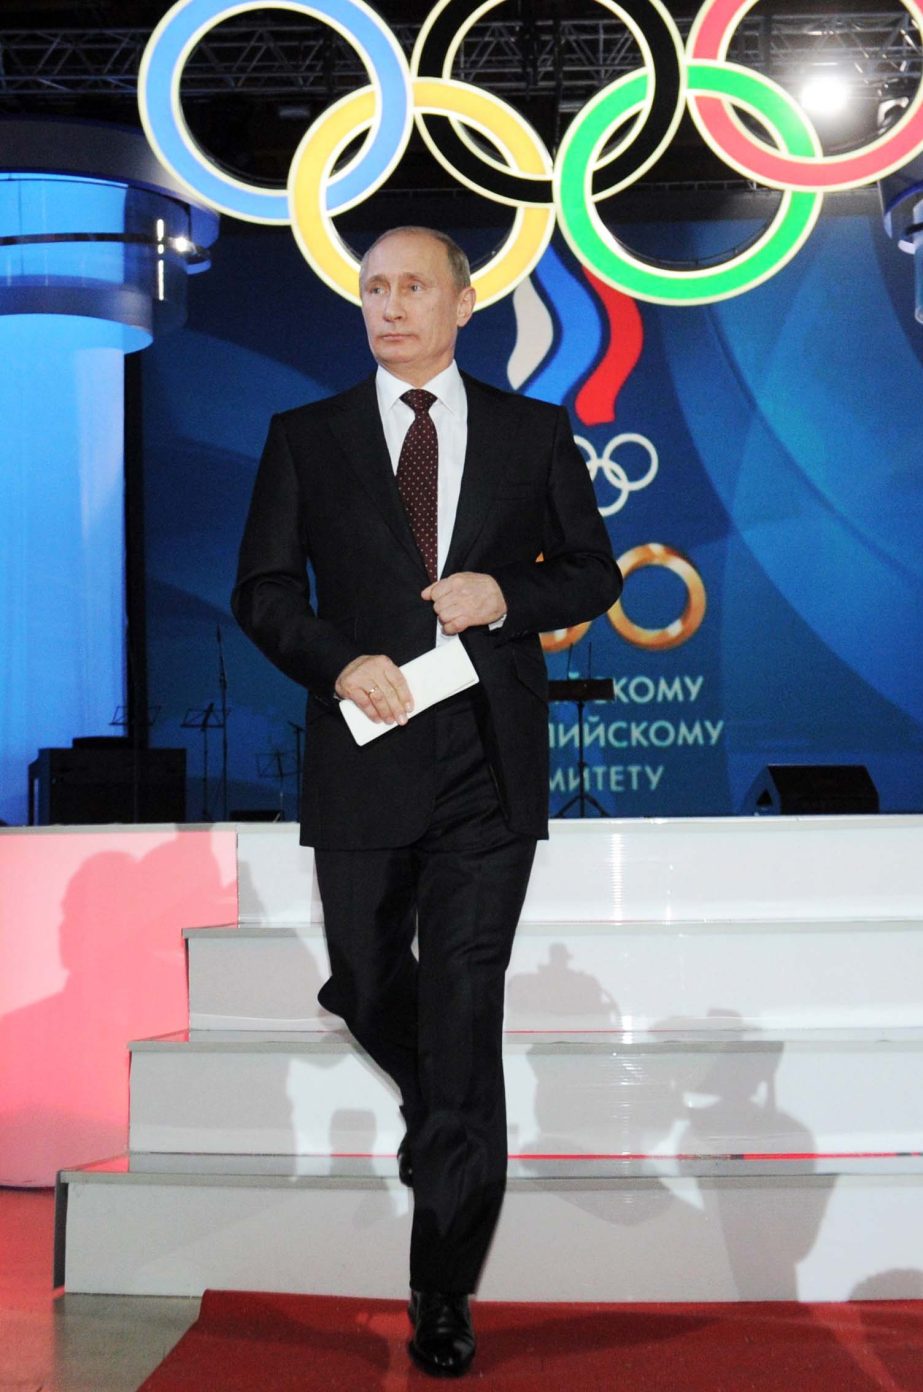 In this Nov. 25, 2011 file photo then Russian Prime Minister Vladimir Putin speaking at a meeting marking the 100th anniversary of the Russian Olympic Committee in Moscow. The executive board of the International Olympic Committee has a teleconference on